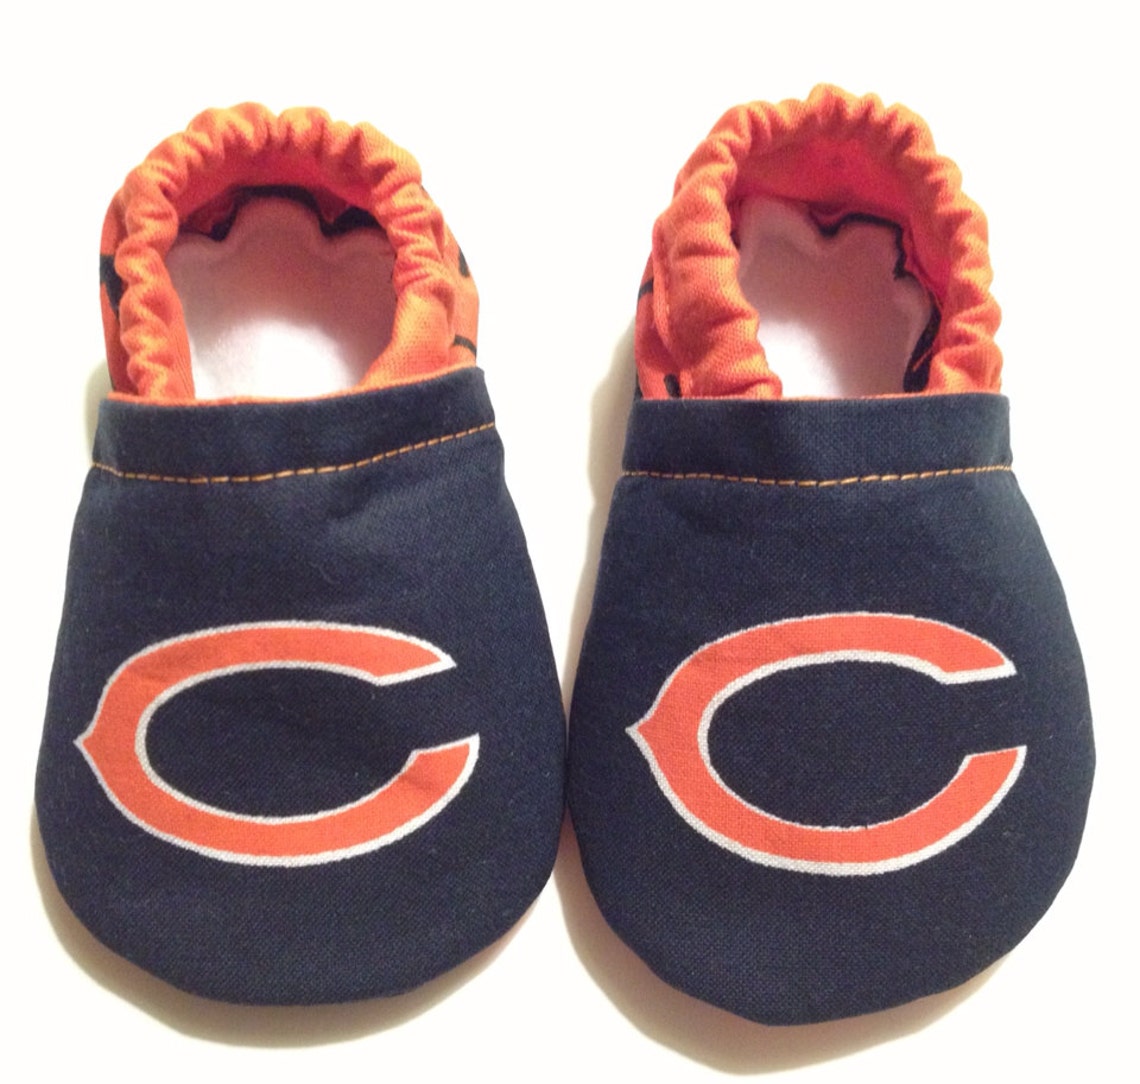 Chicago Bears Cloth Baby Booties | Etsy